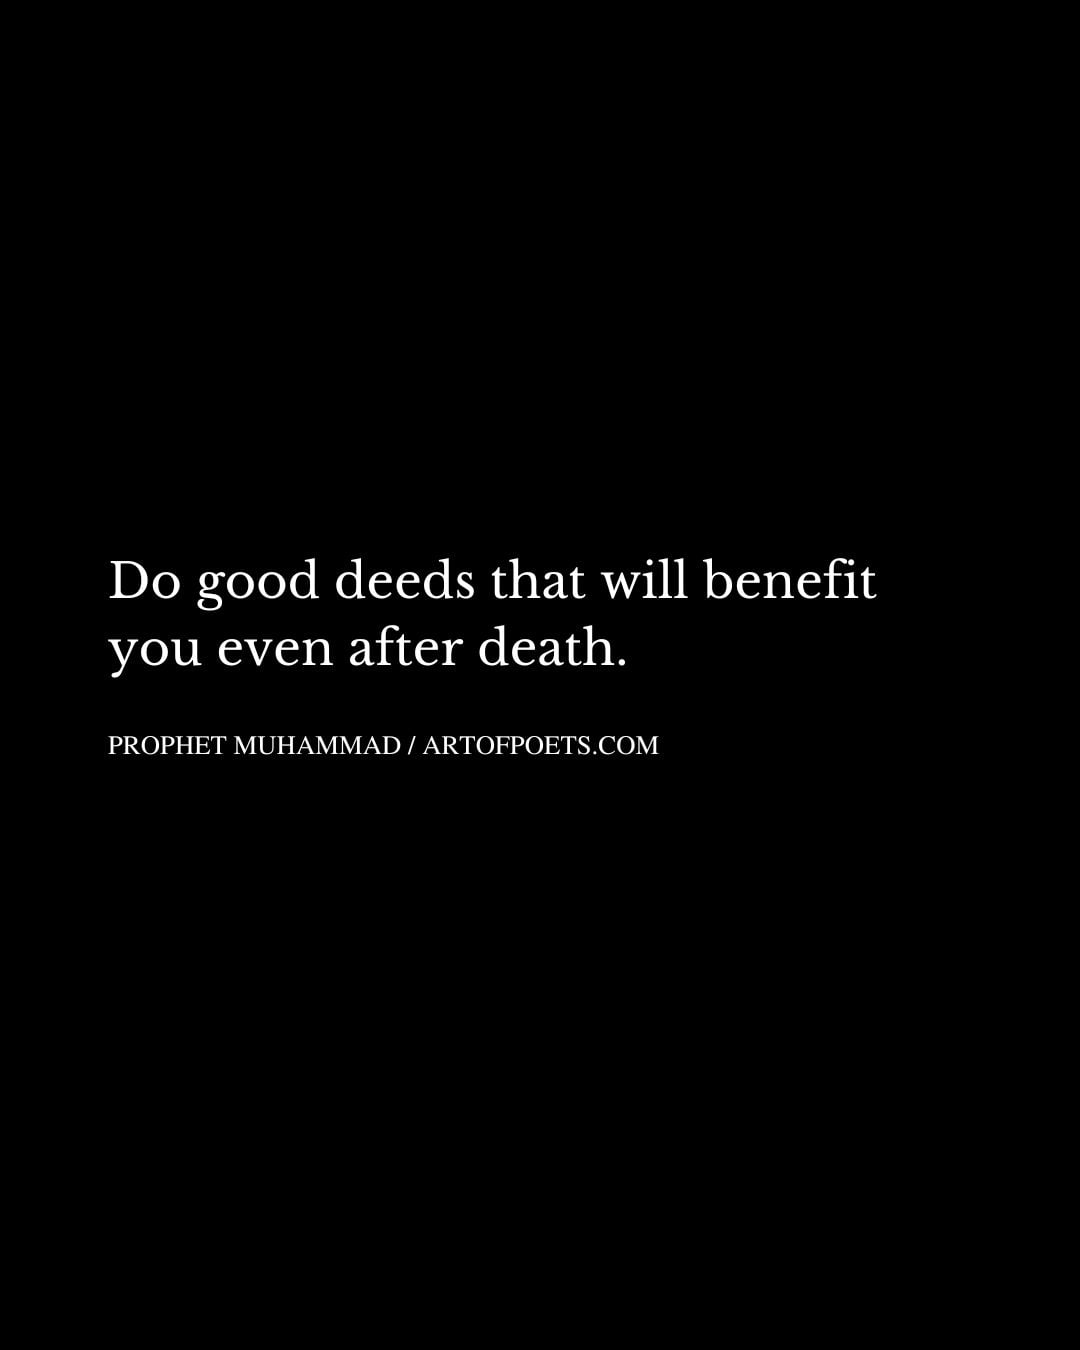 Do good deeds that will benefit you even after death